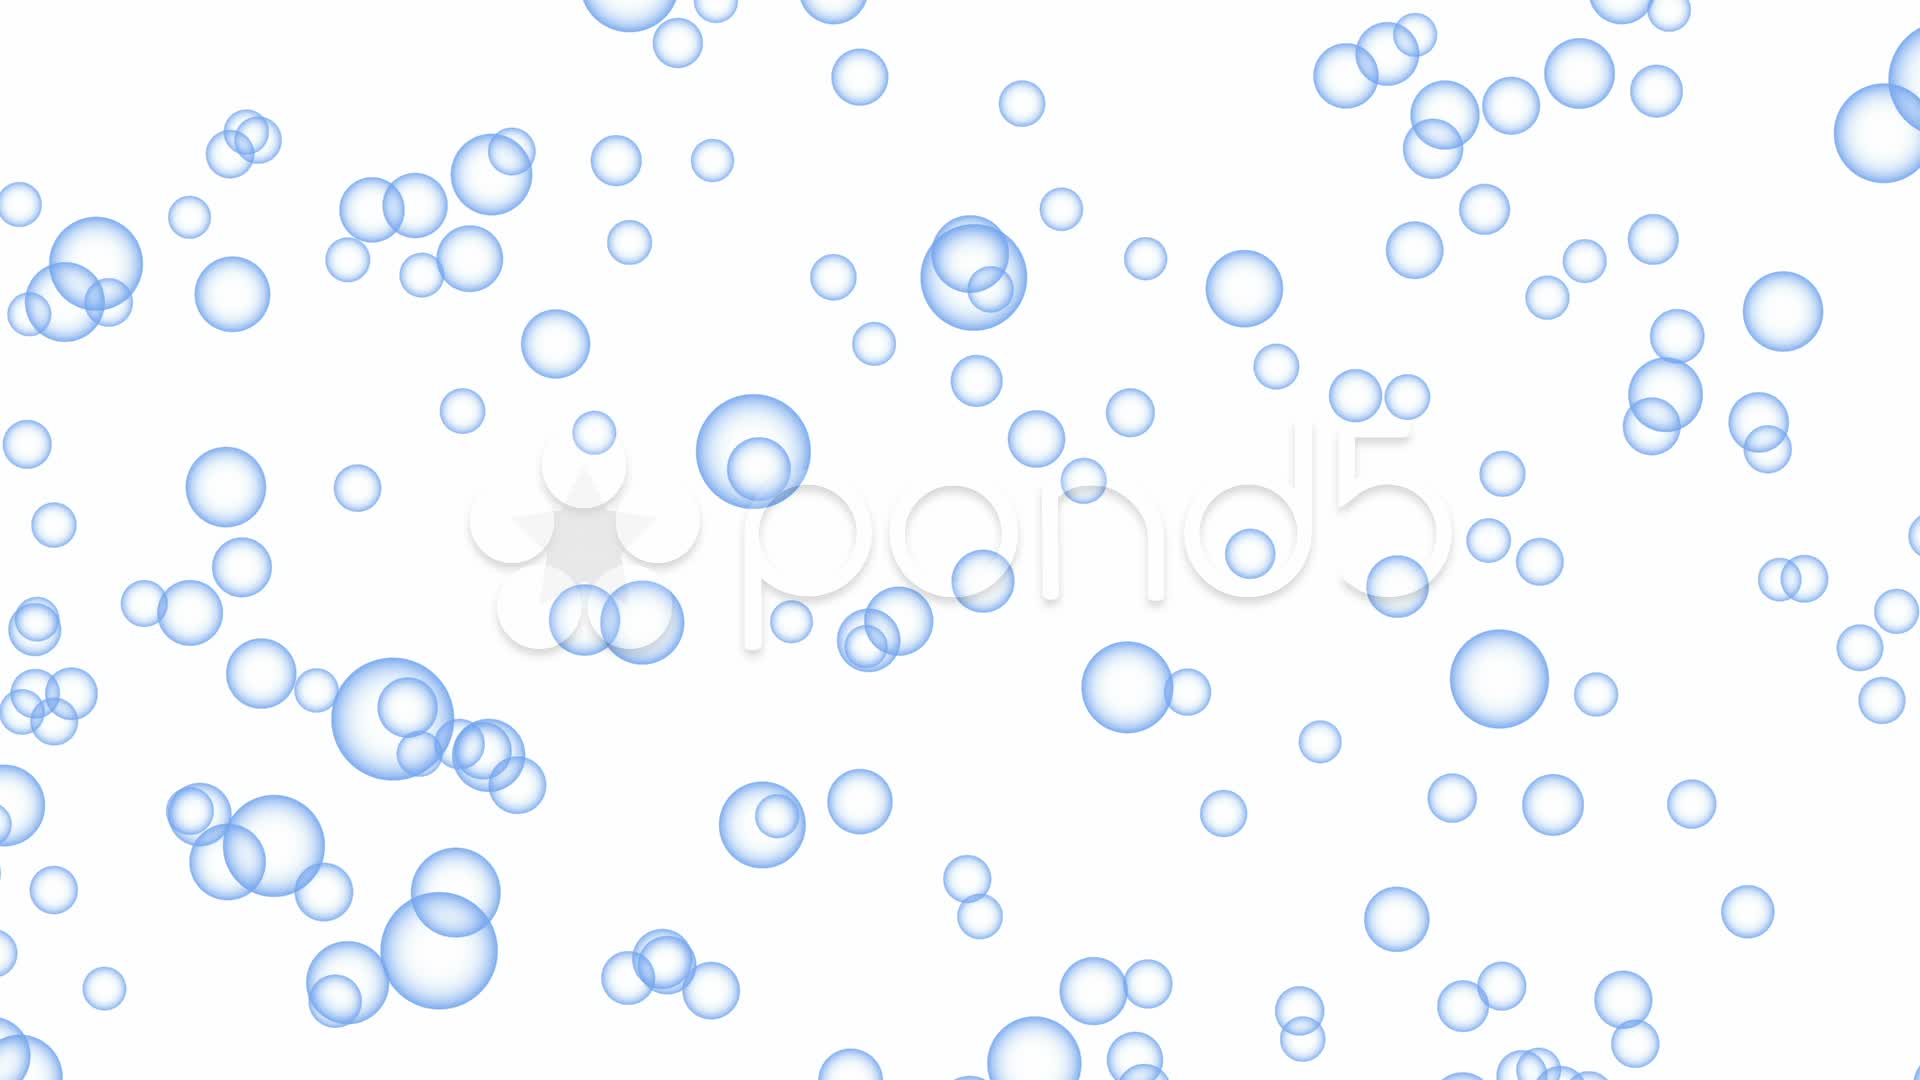 Loopable bubbles texture background ~ Stock Video #22244745